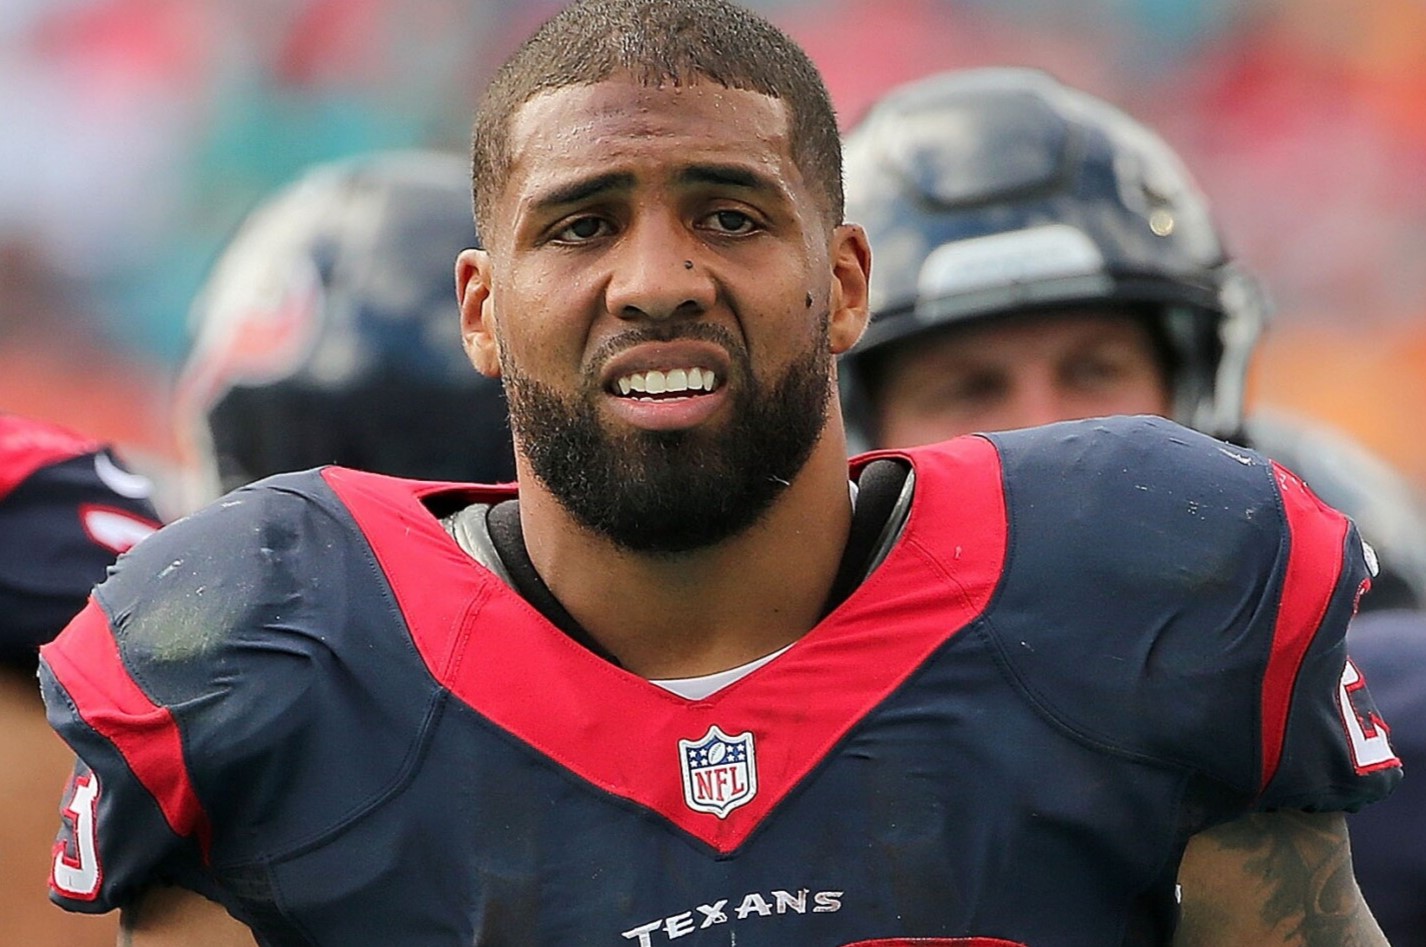 17-astonishing-facts-about-arian-foster